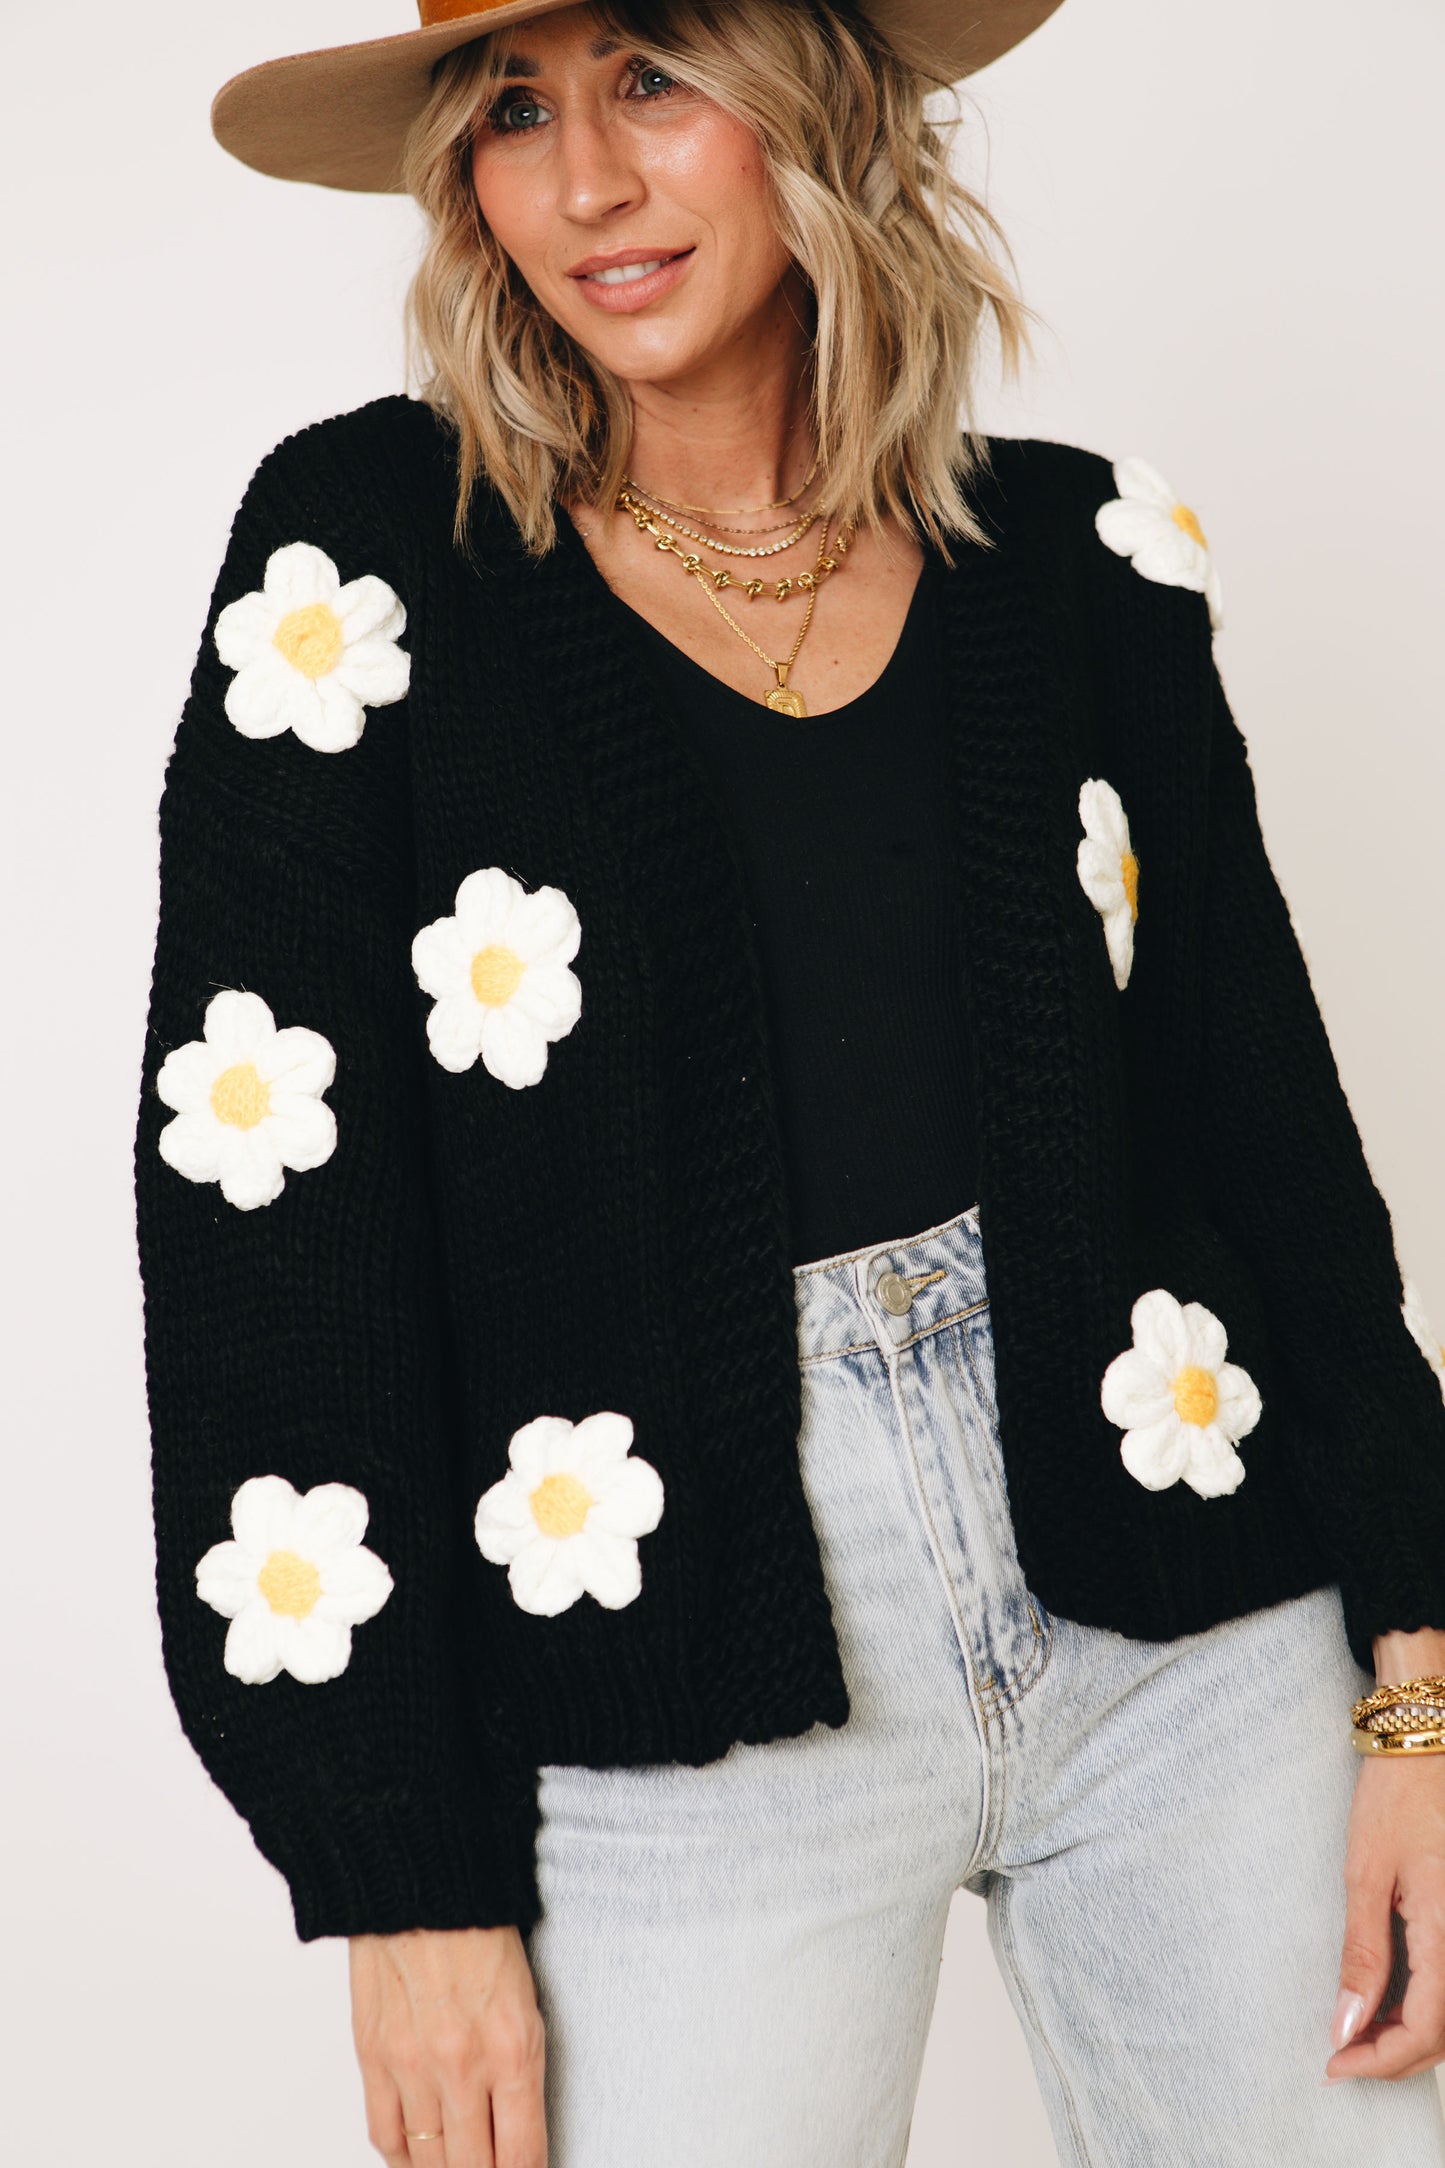 Pocket full Of Daisies Sweater Knit Cardigan (S-3XL)